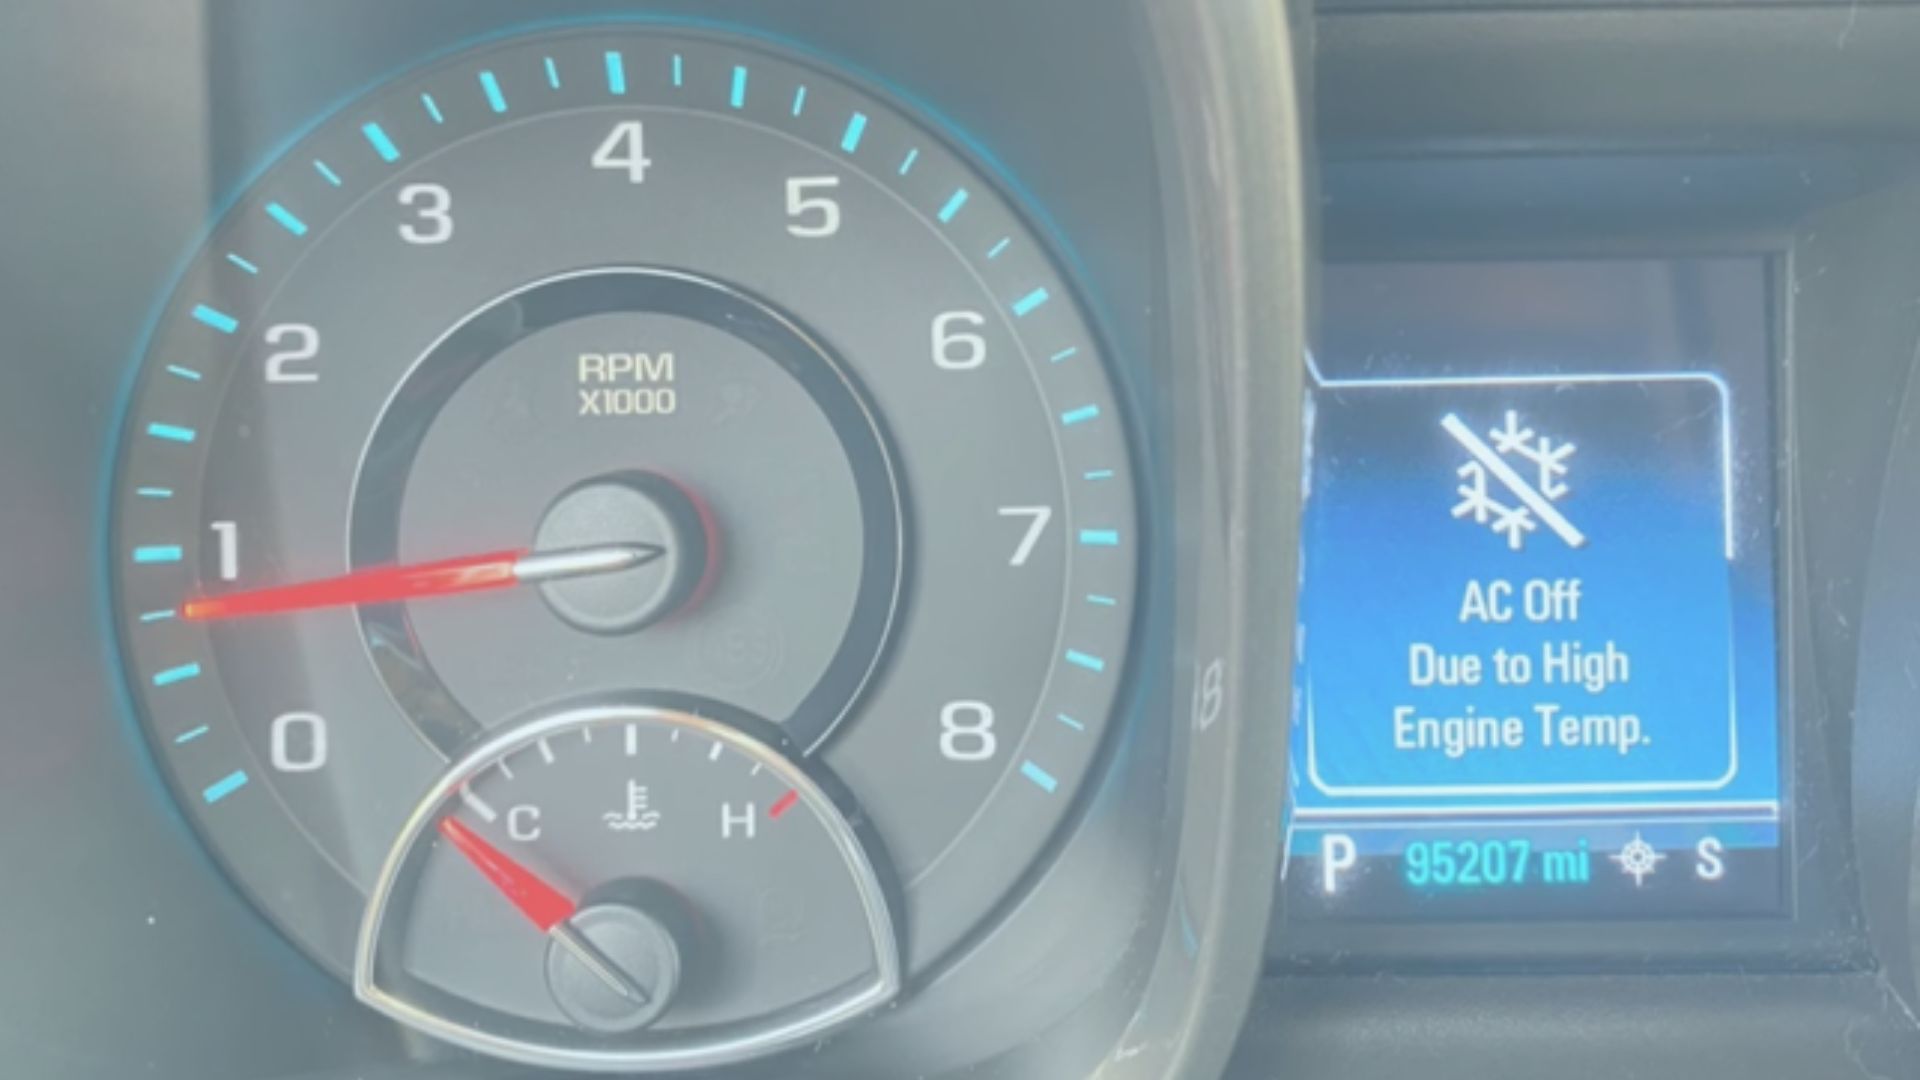 Car Says AC Off Due To High Temperature